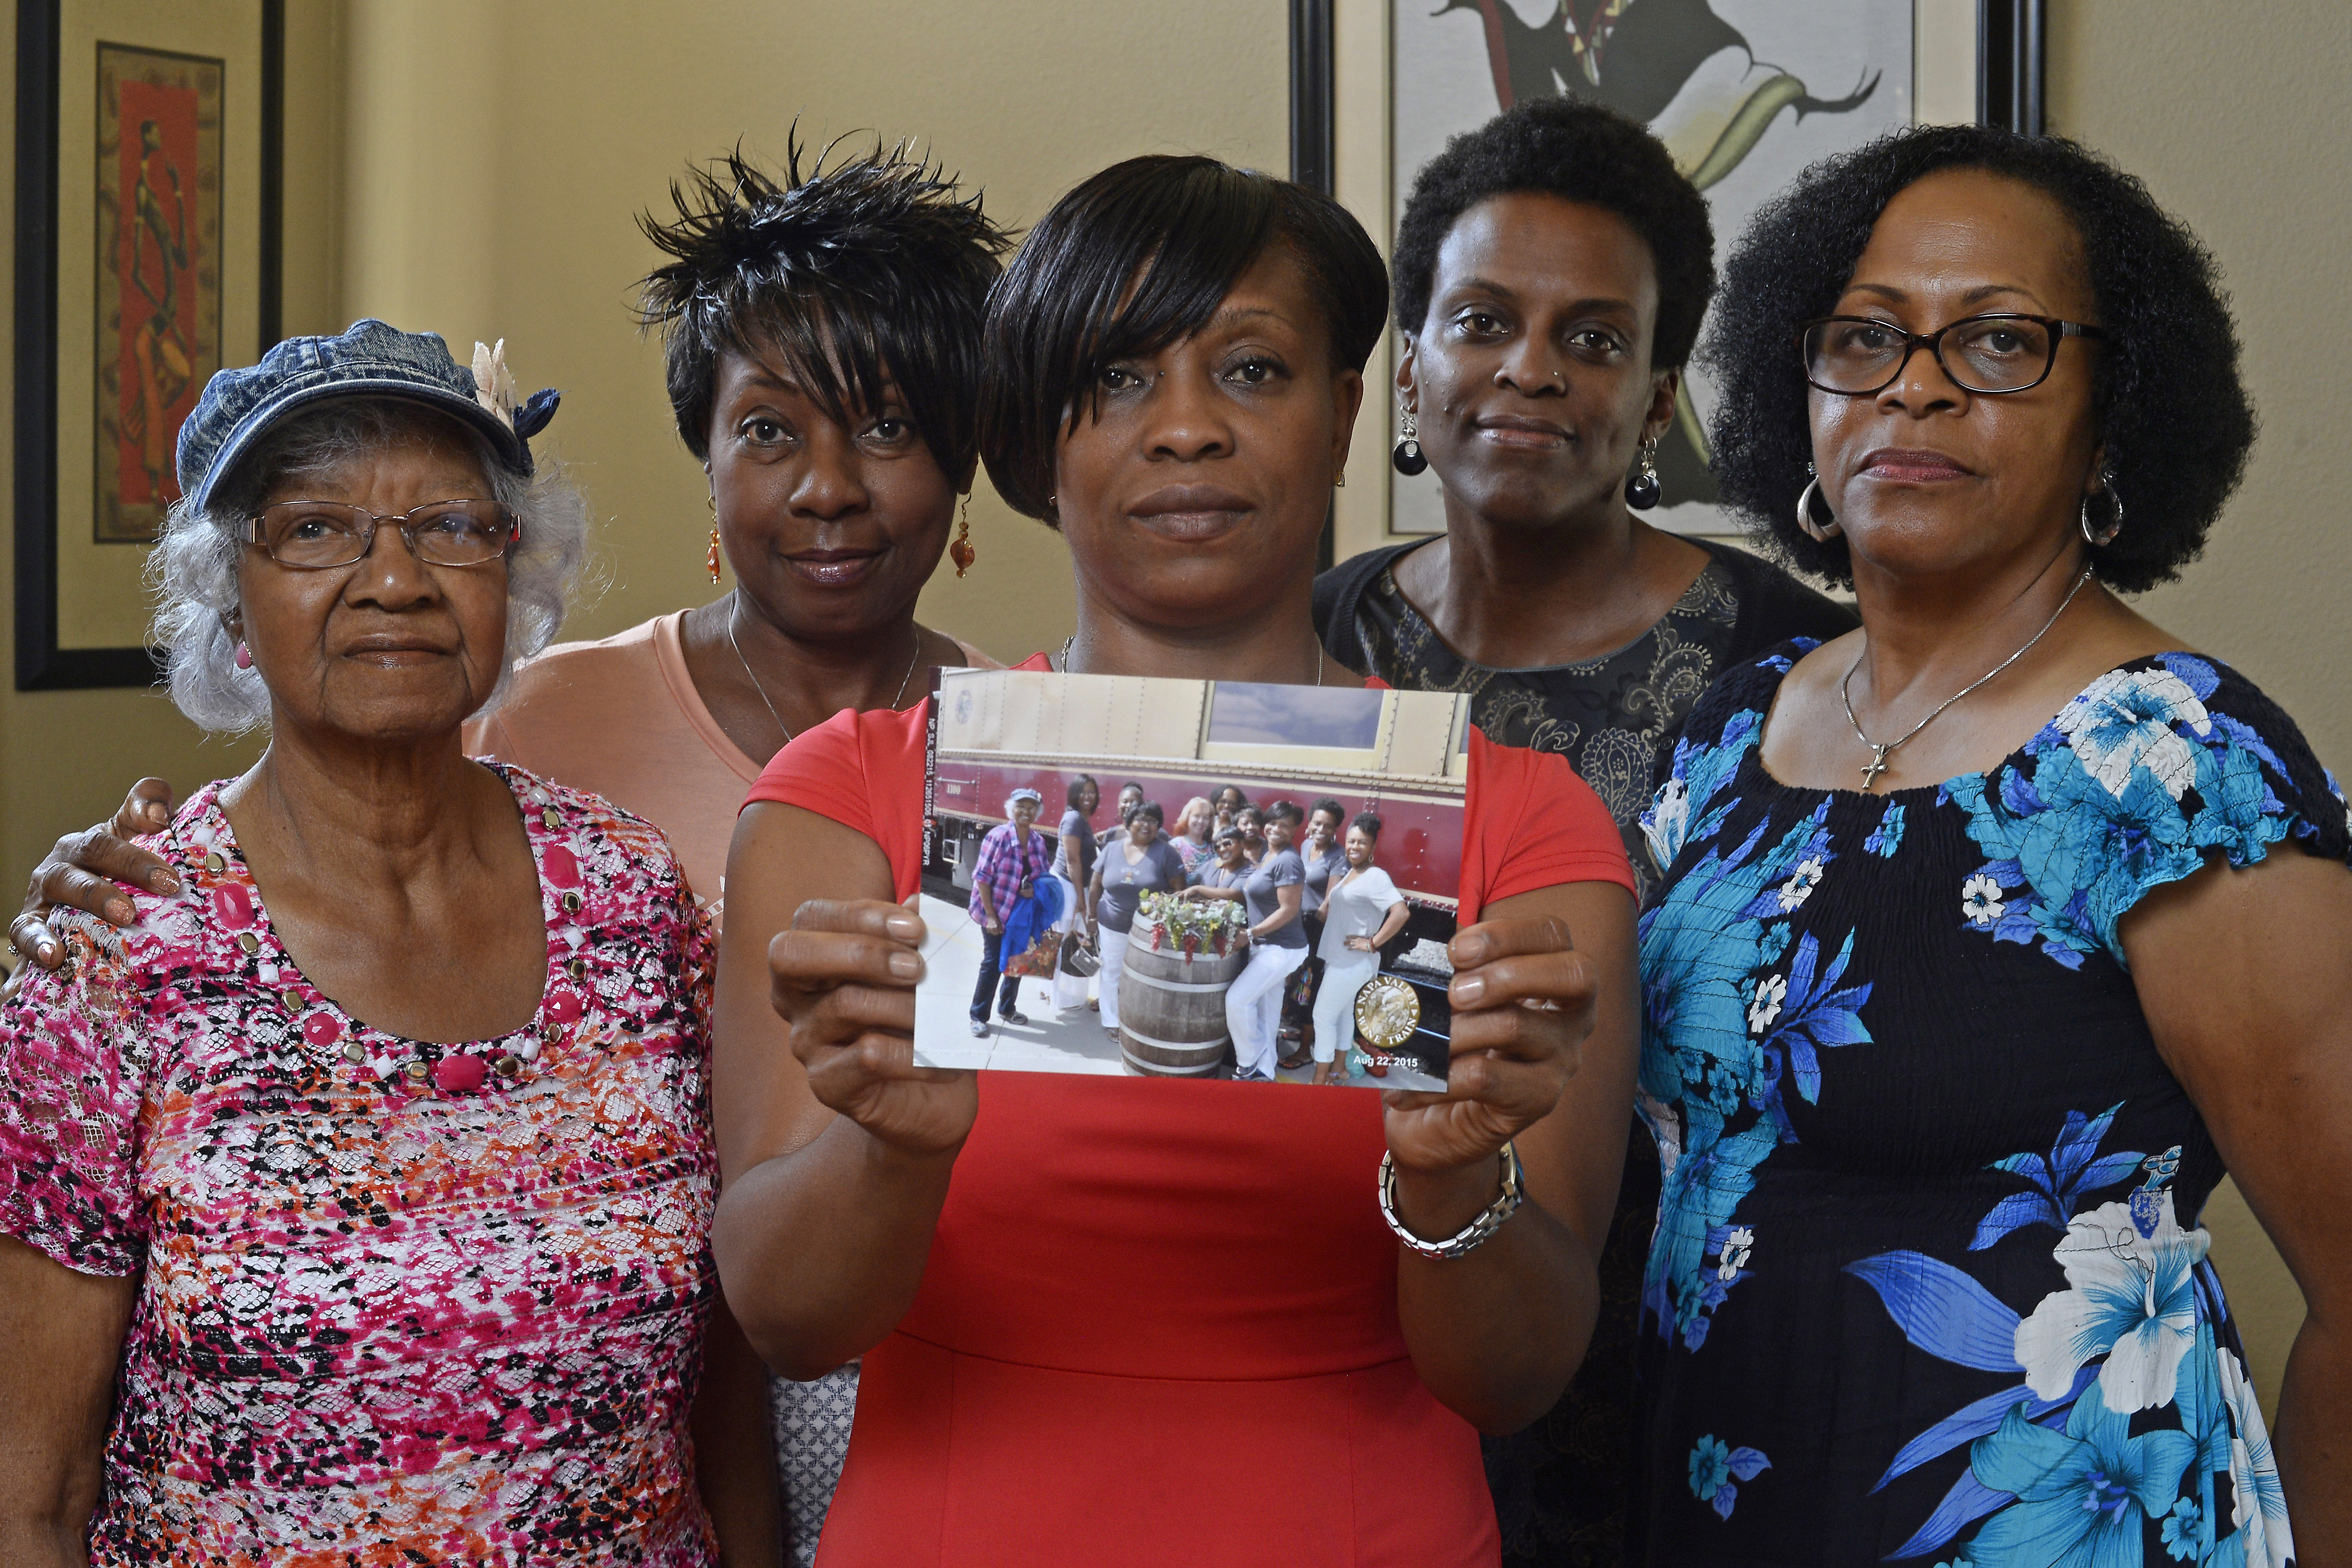 Five members of the Sistahs on the Reading Edge book club, all of Antioch, from left, Katherine Neal, Georgia Lewis, Lisa Renee Johnson, Allisa Carr and Sandra Jamerson stand together at Johnson's home in Antioch, Calif., on Aug. 24, 2015. (Jose Carlos Fajardo—AP)